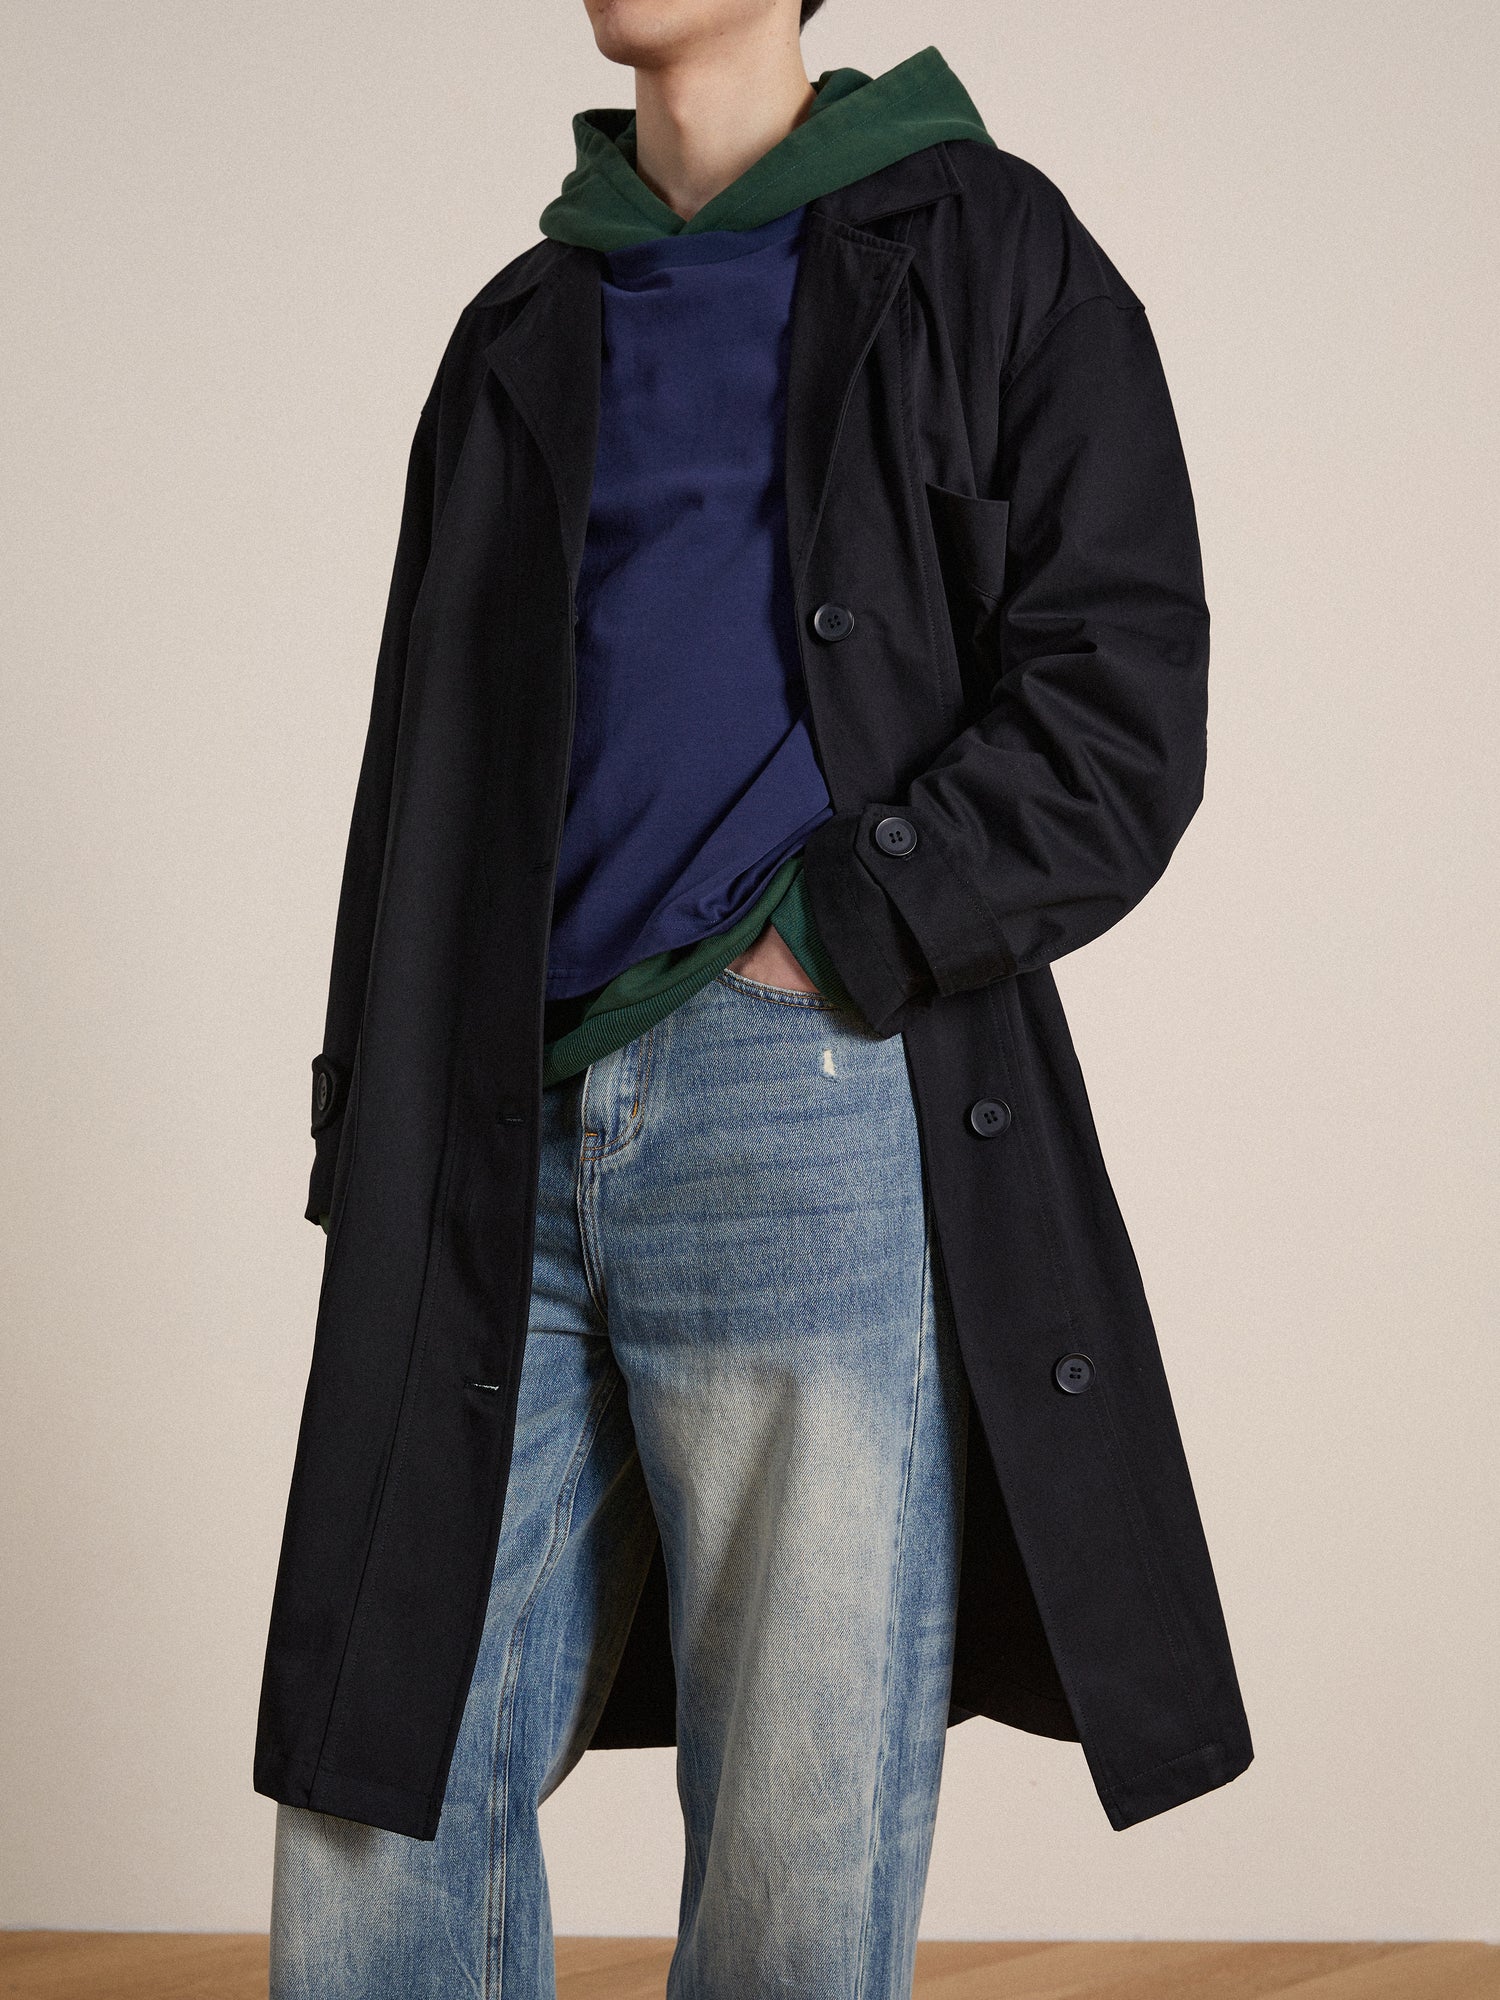 A model wearing a Found naval trench coat and jeans, embodying enduring sophistication.